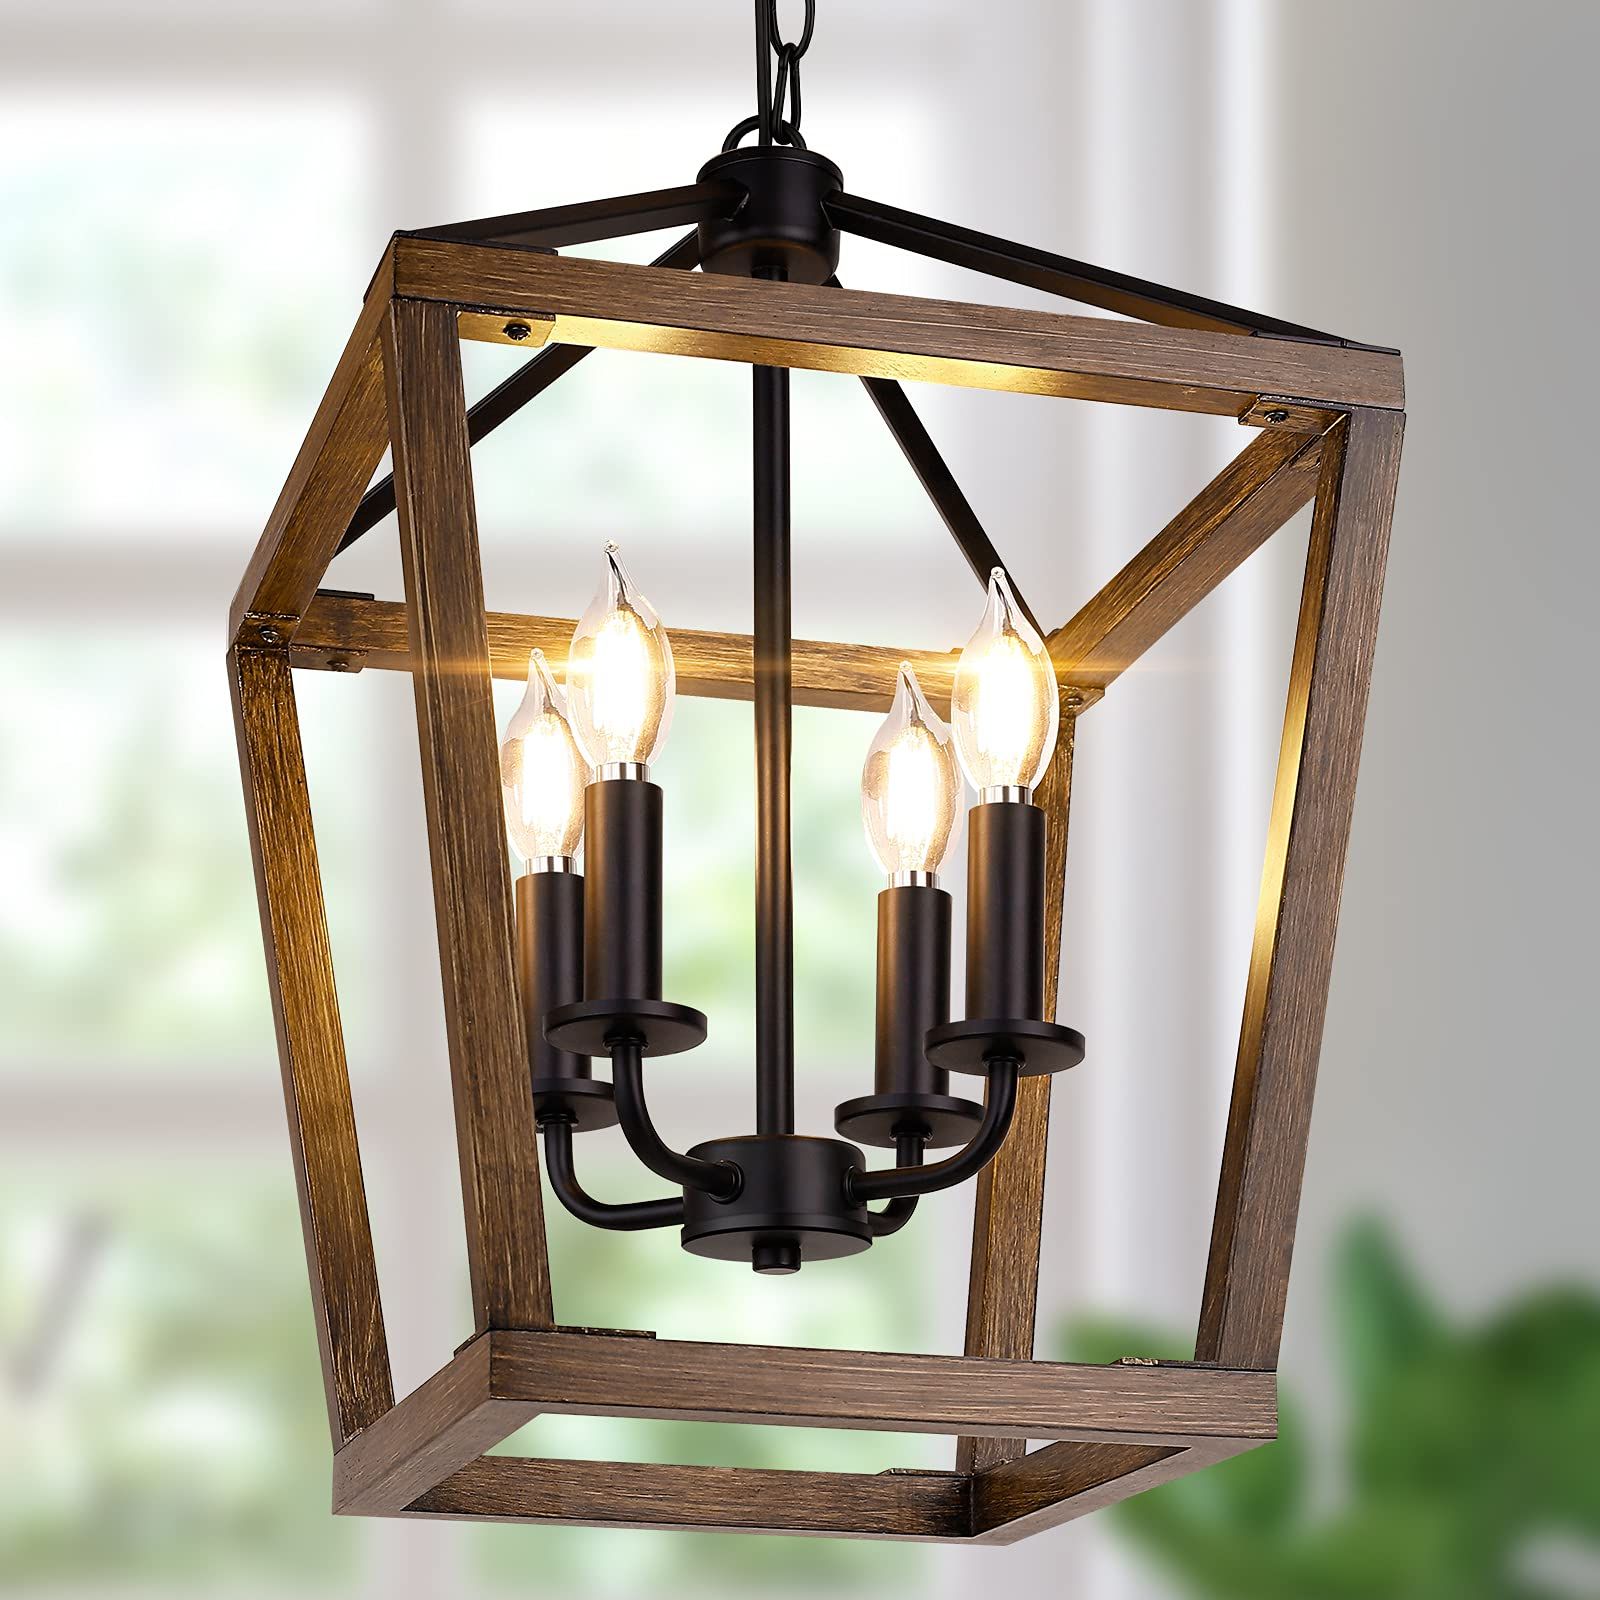 Favorite Adjustable Lantern Chandeliers Regarding Farmhouse Chandelier Light Fixture For Kitchen Dining Room, 4 Light Rustic  Pendant Hanging Ceiling Light Height Adjustable In Oak Wood Finish, Cage Lantern  Lighting With E12 Base For Hallway Foyer – – Amazon (View 4 of 10)